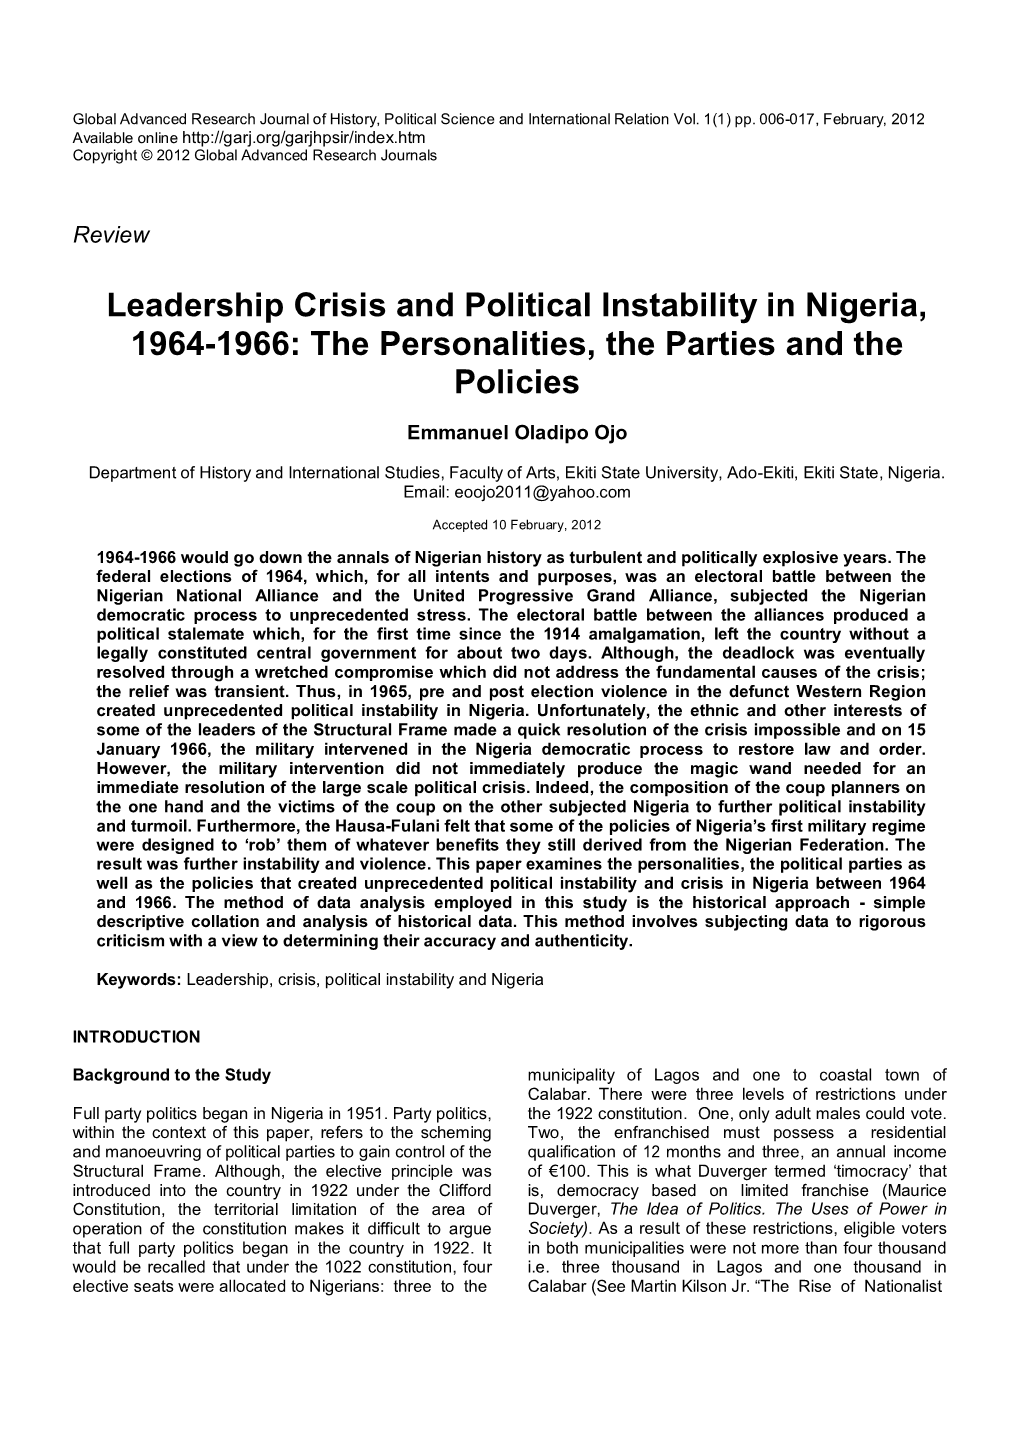 Leadership Crisis and Political Instability in Nigeria, 1964-1966: the Personalities, the Parties and the Policies